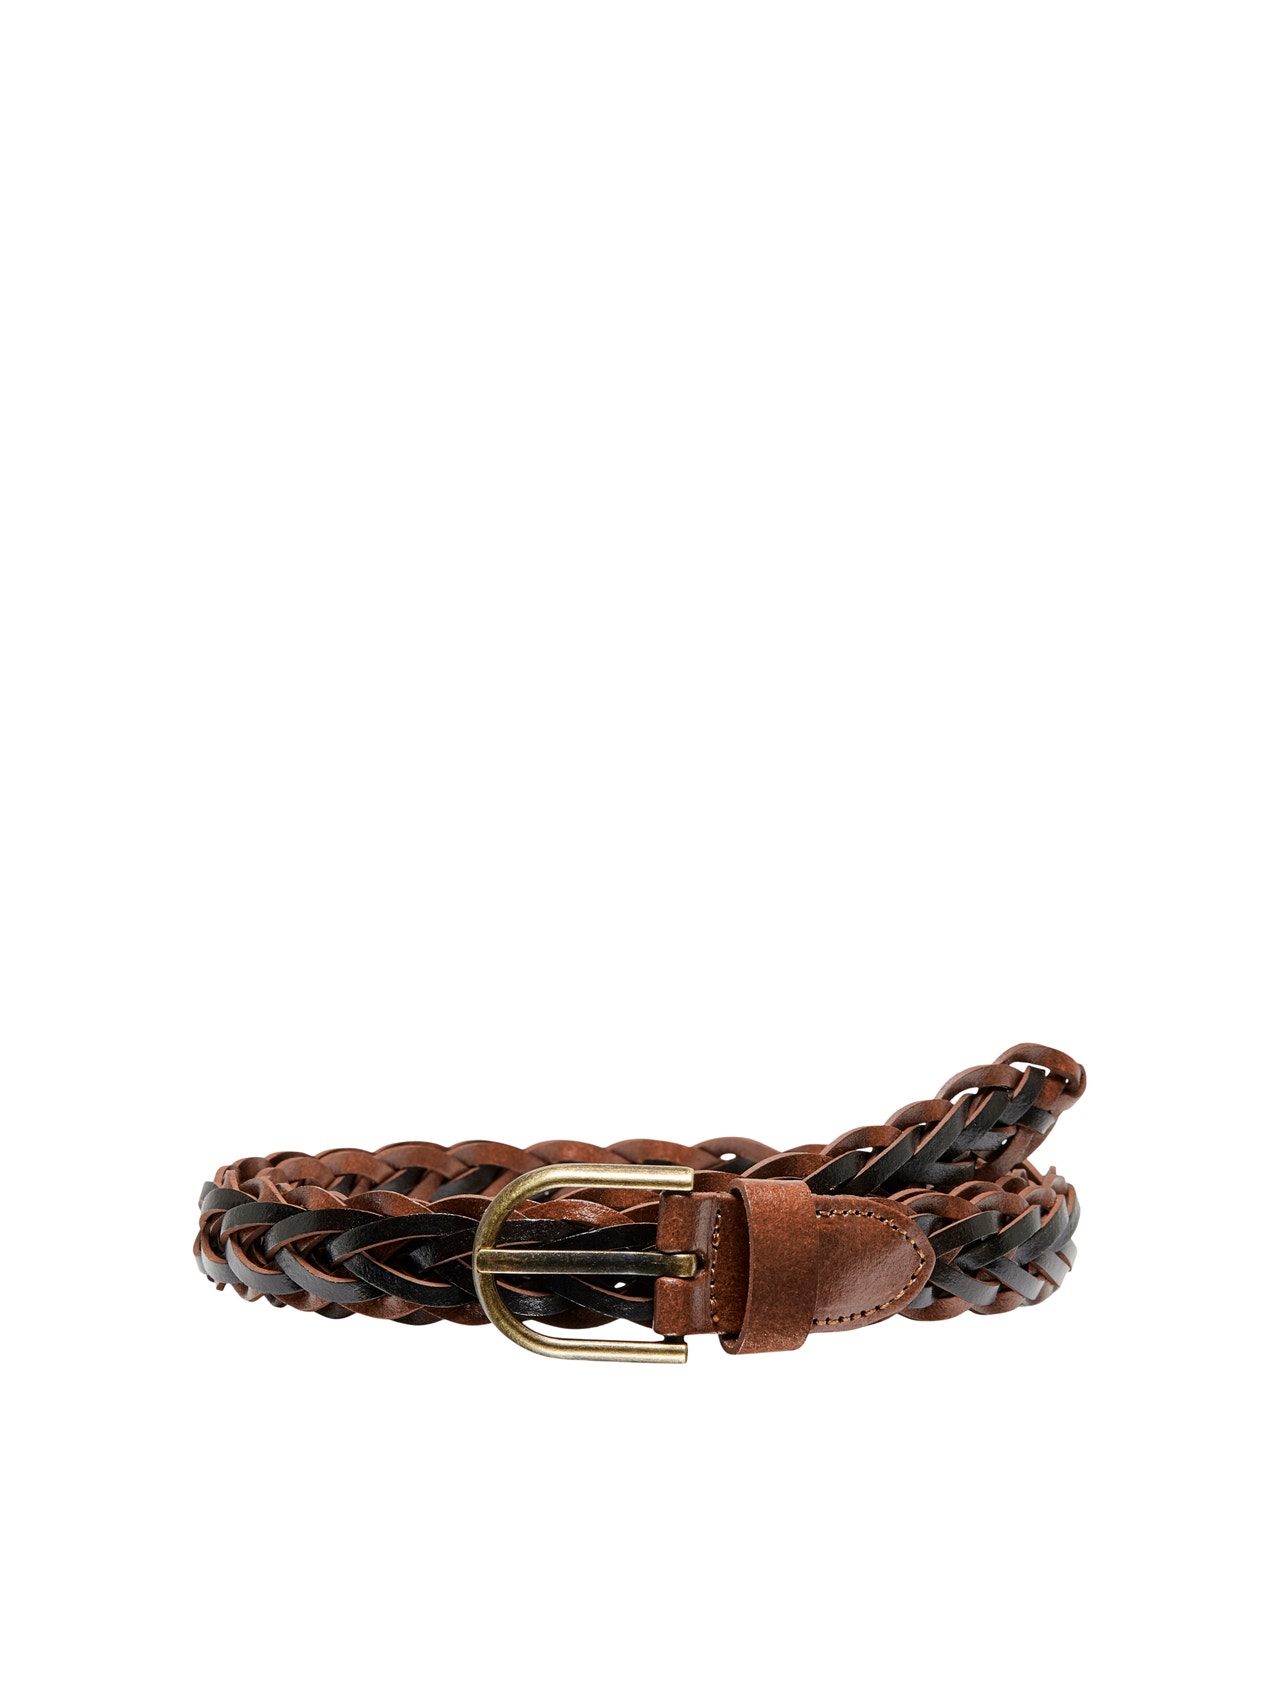 ONLY Belts -Chocolate Brown - 15284507